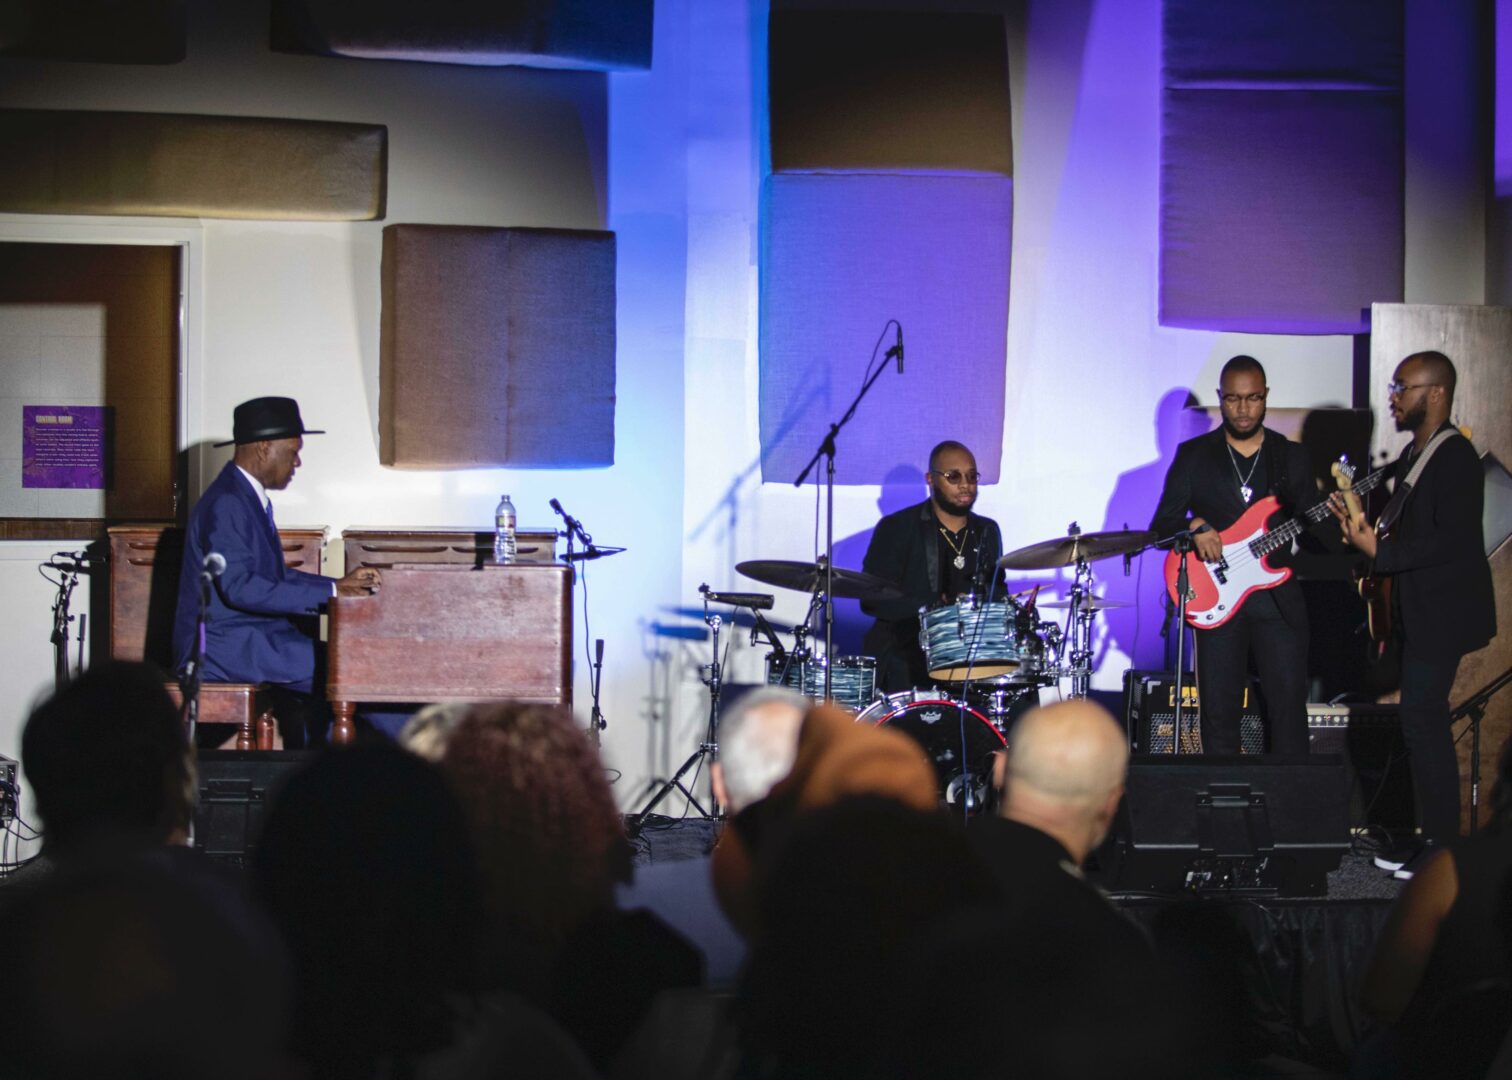 Booker T. Jones performs with Stax Music Academy alumni at Stax Museum's 20th Anniversary announcement event BOOKER TRIPLETS SMALL